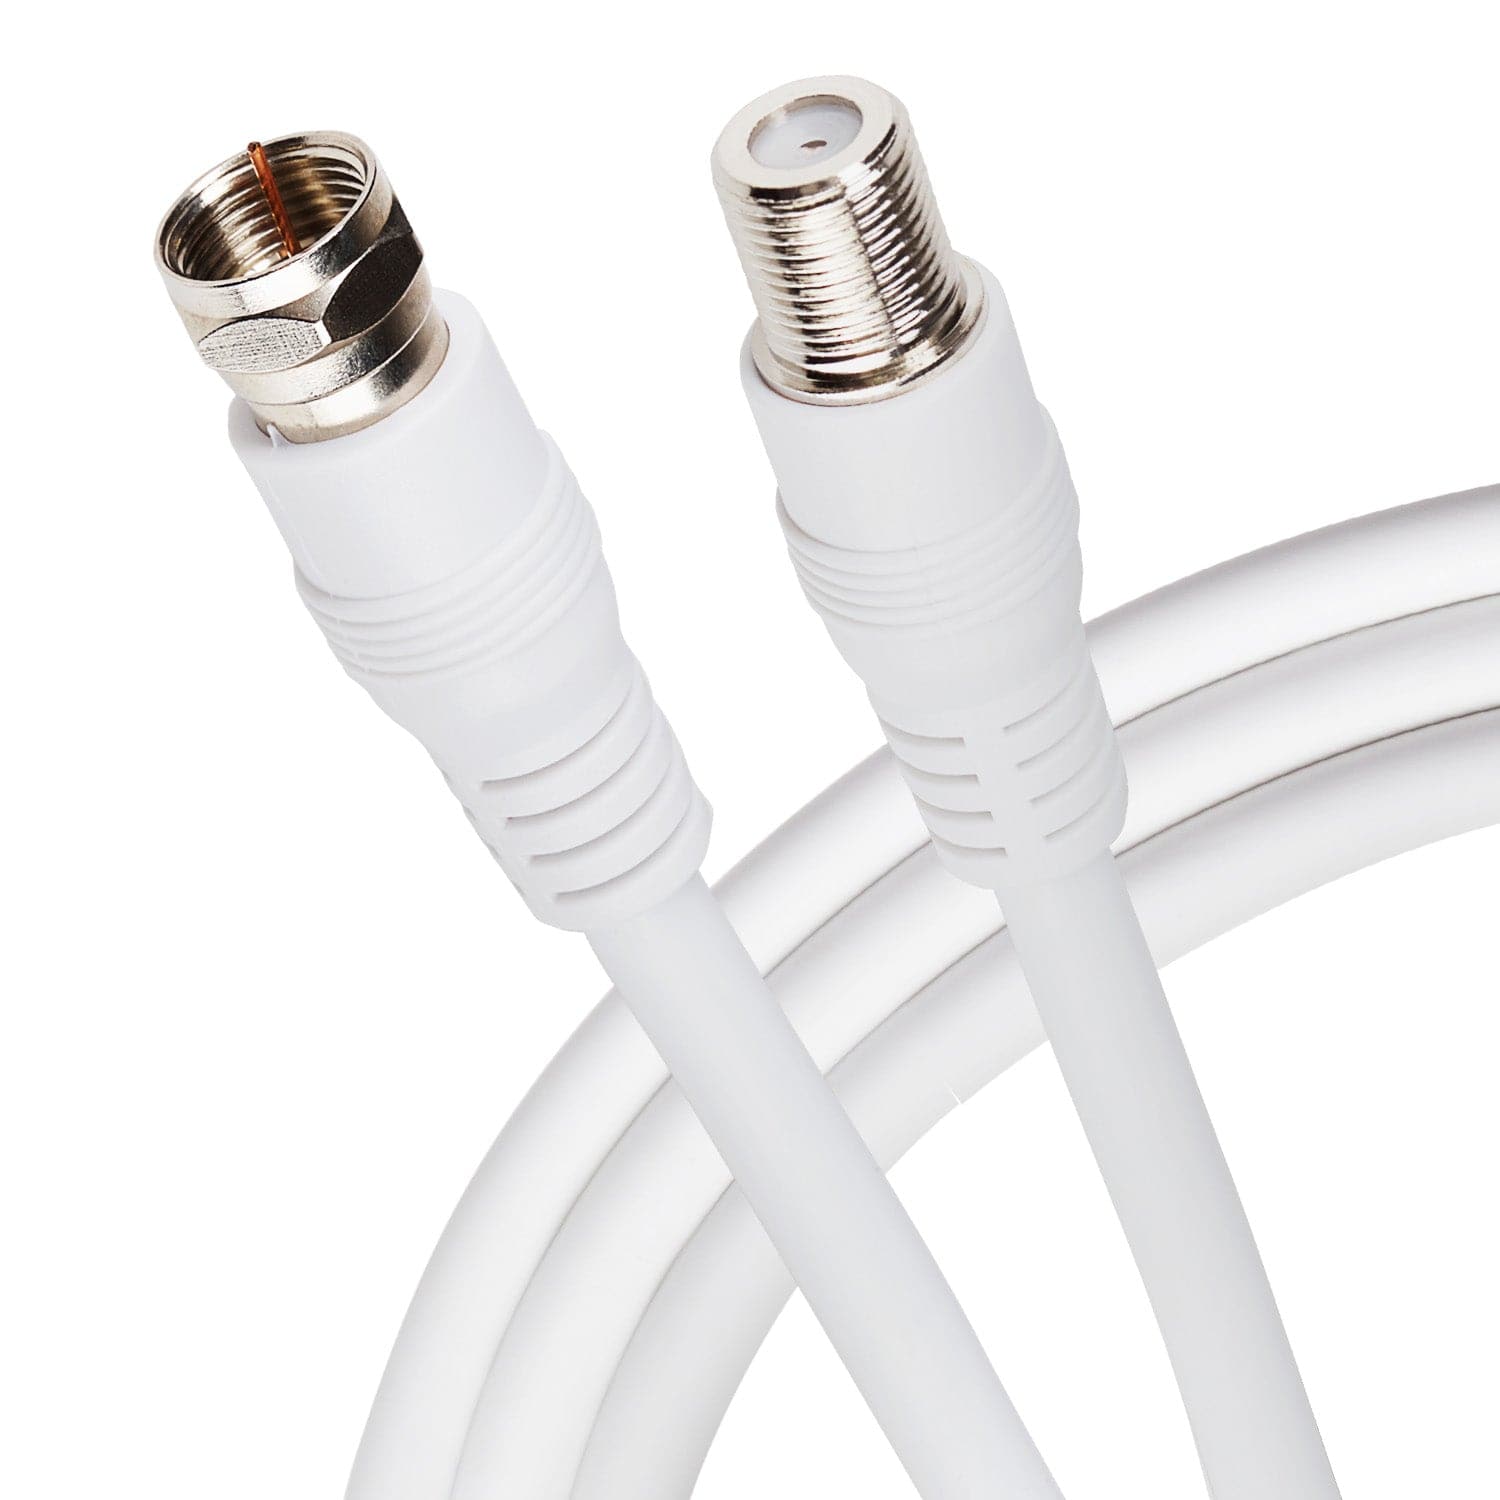 Maplin Satellite Cable Extension Coaxial F Type Male to F Type Female - White - maplin.co.uk